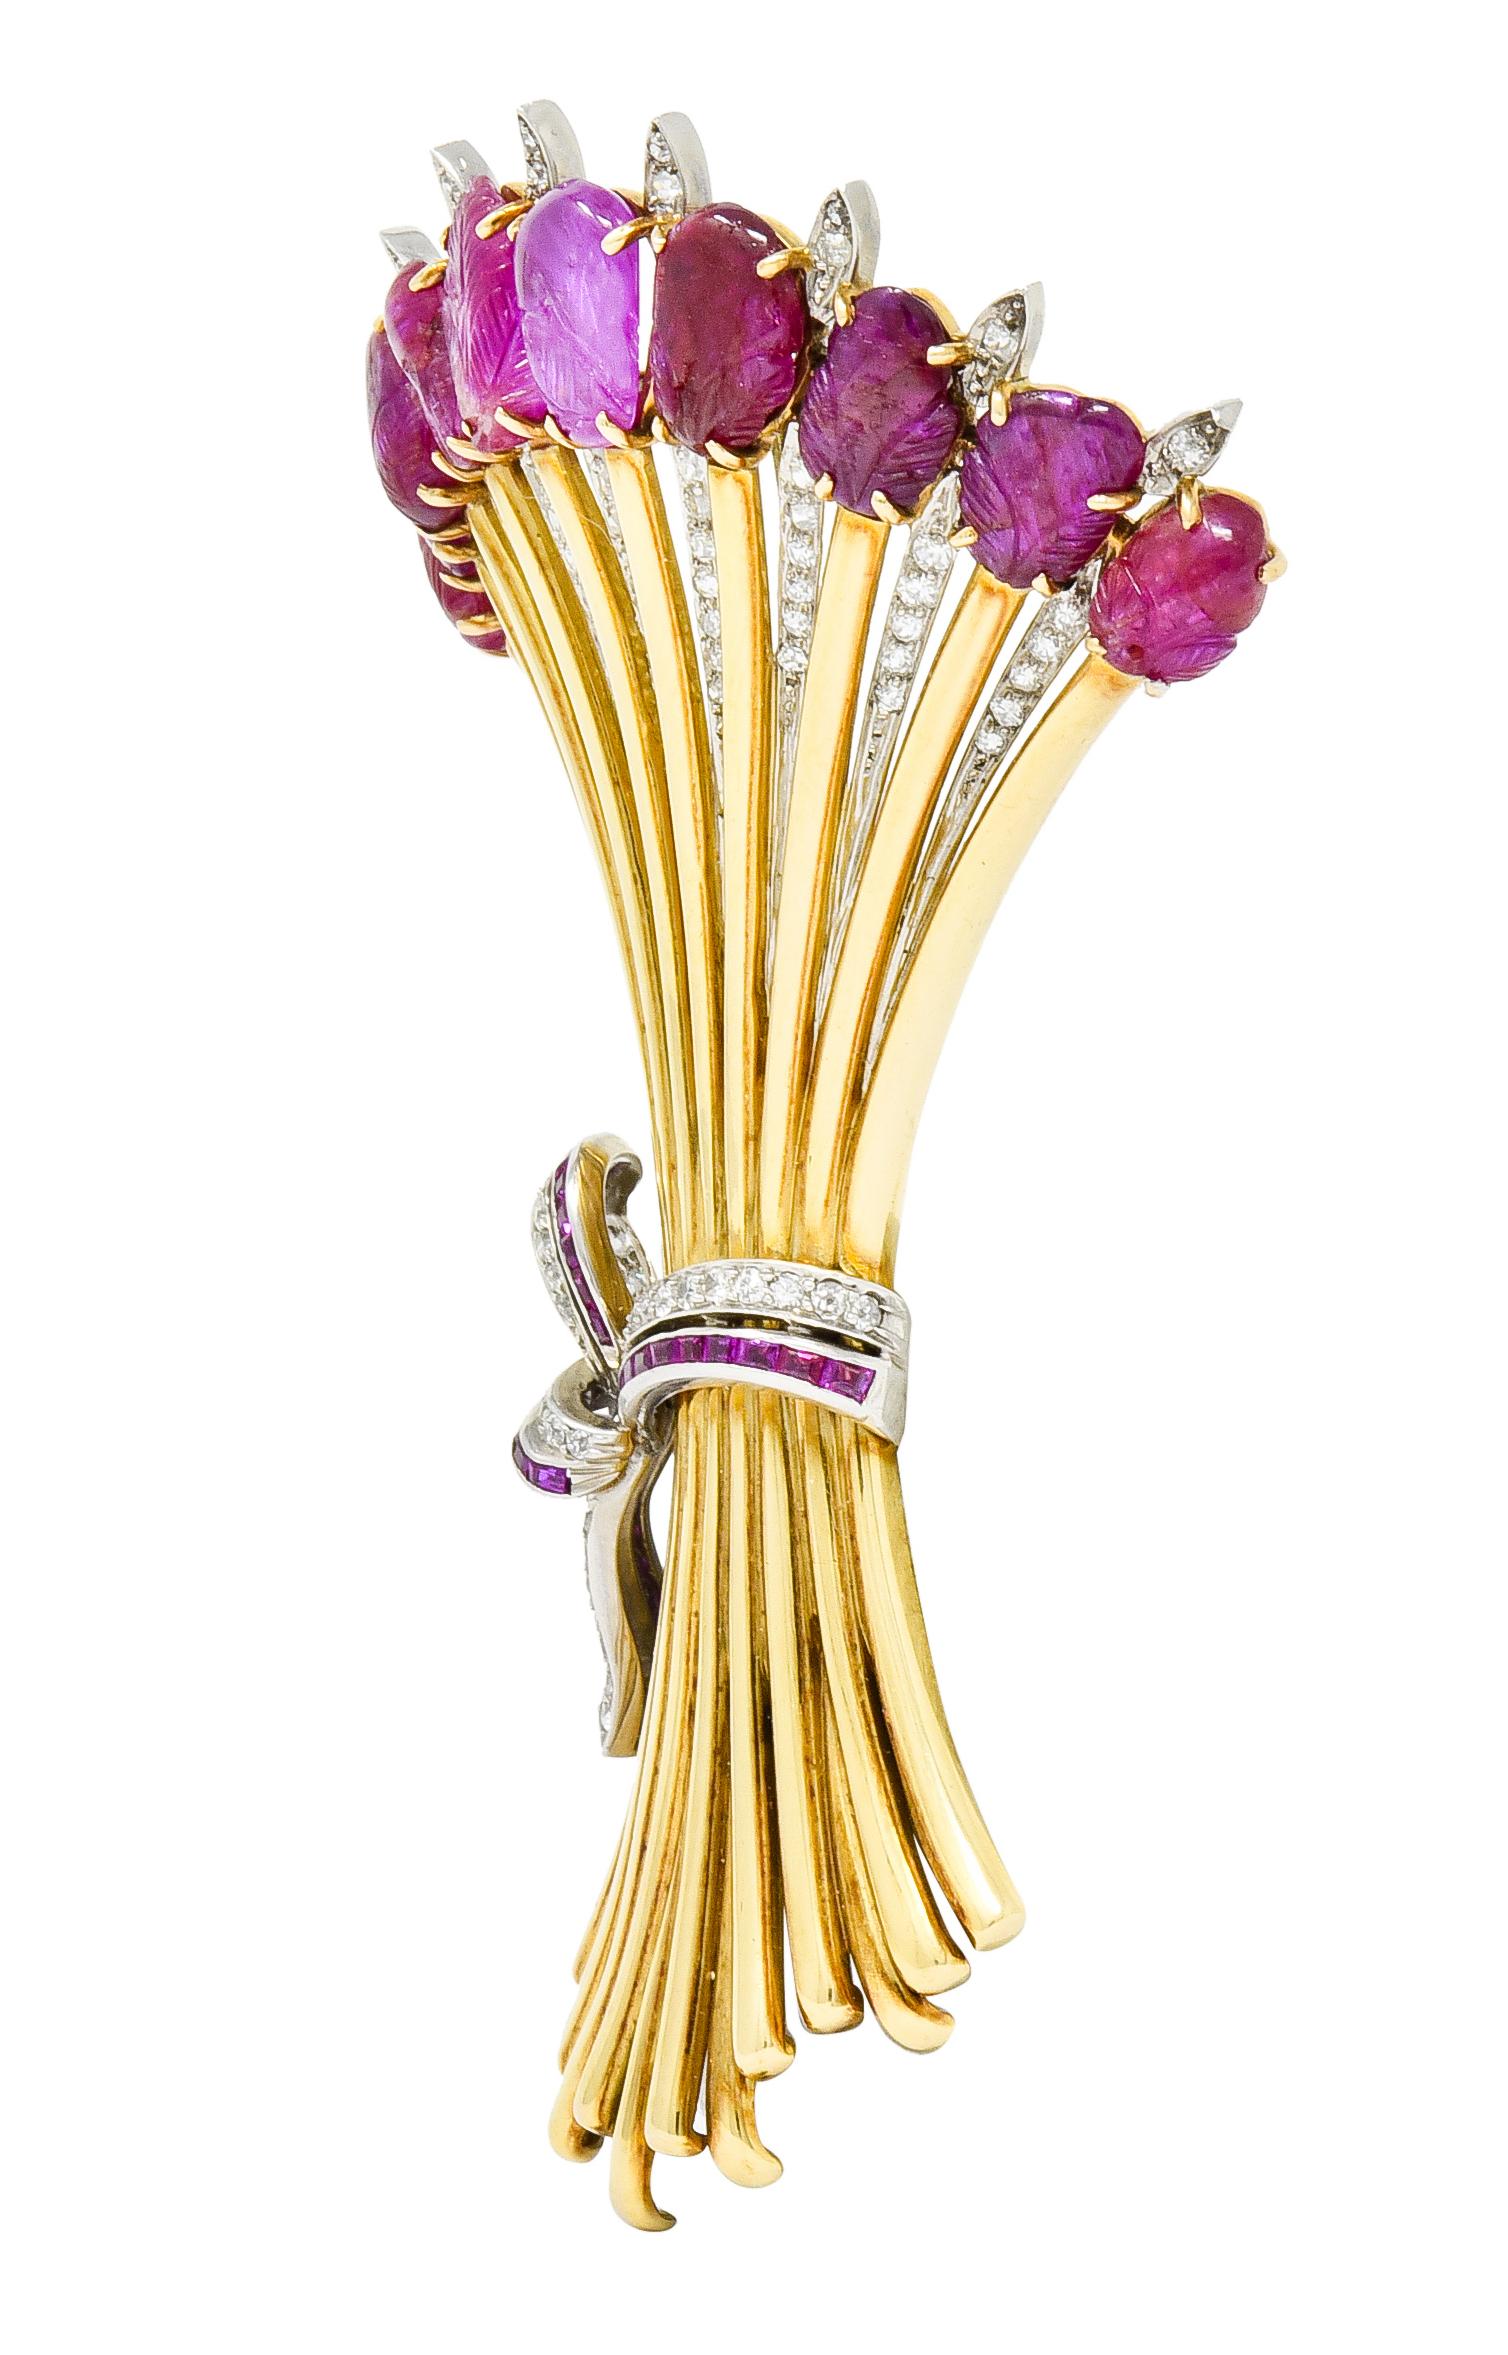 Brooch is designed as a bundle of wheat cinched by a platinum ribbon and flared polished gold stems

Terminating as a row of prong set rubies deeply carved with foliate motifs; red to purplish-red in color and translucent with natural